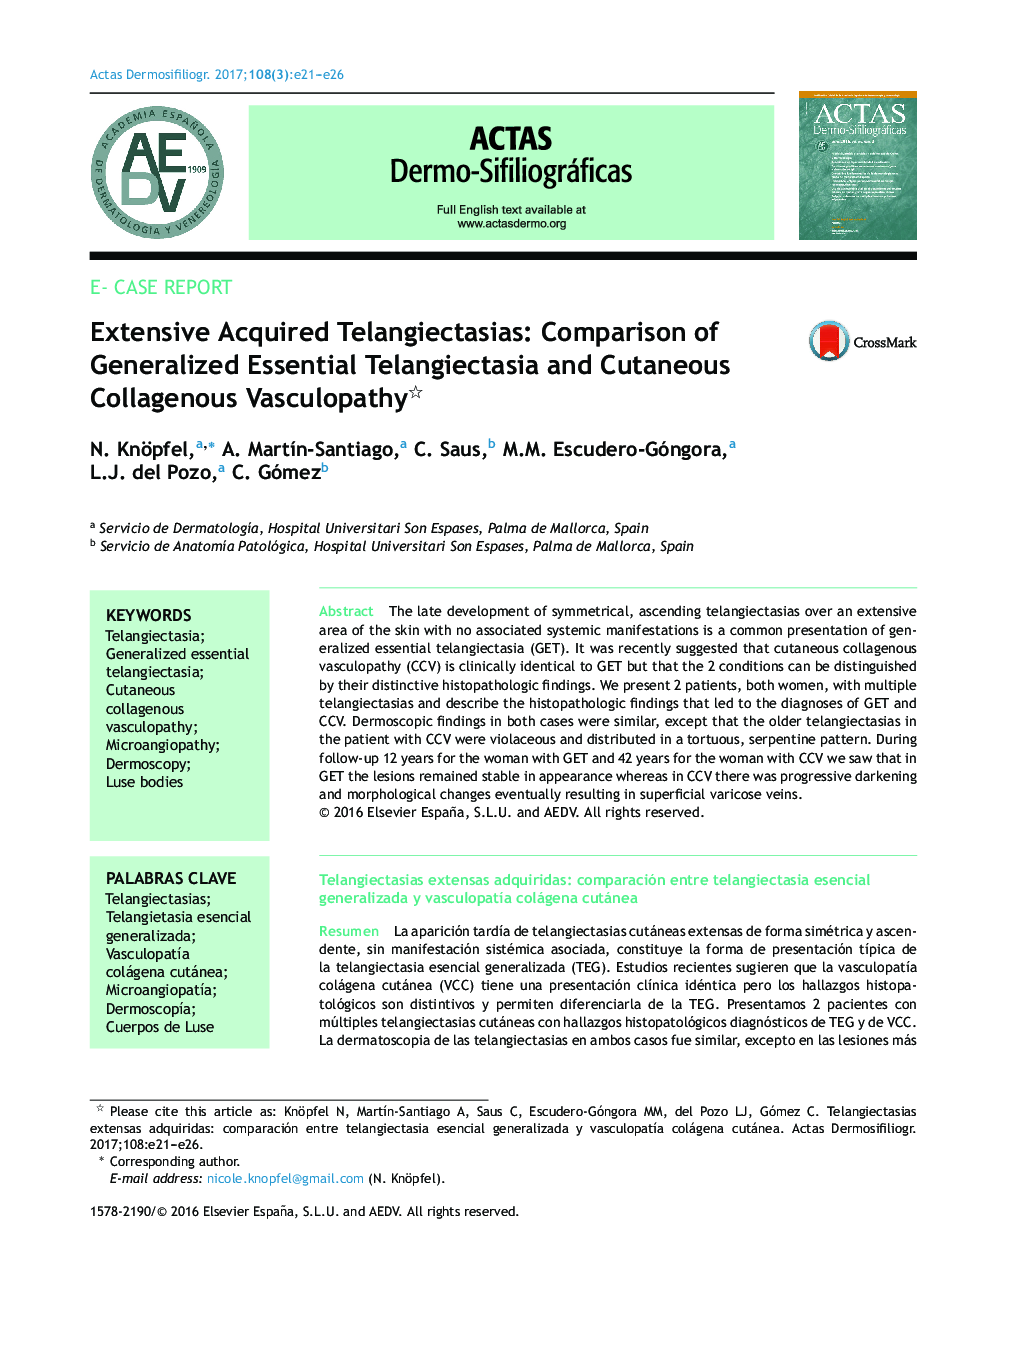 Extensive Acquired Telangiectasias: Comparison of Generalized Essential Telangiectasia and Cutaneous Collagenous Vasculopathy